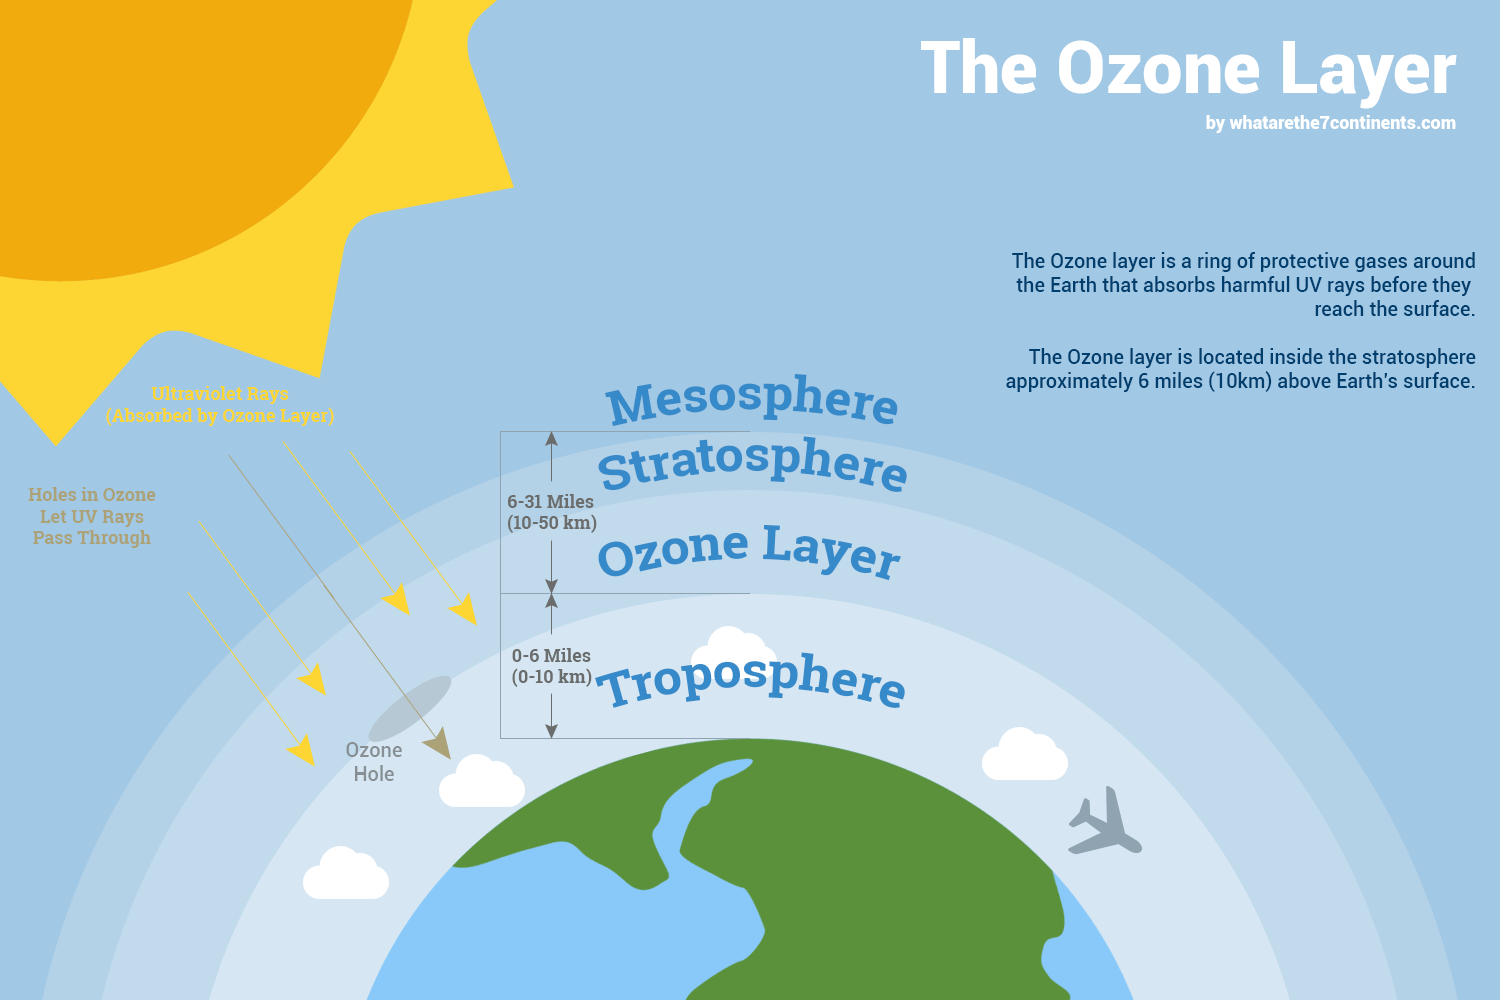 the-ozone-layer-diagram-explained-map-he